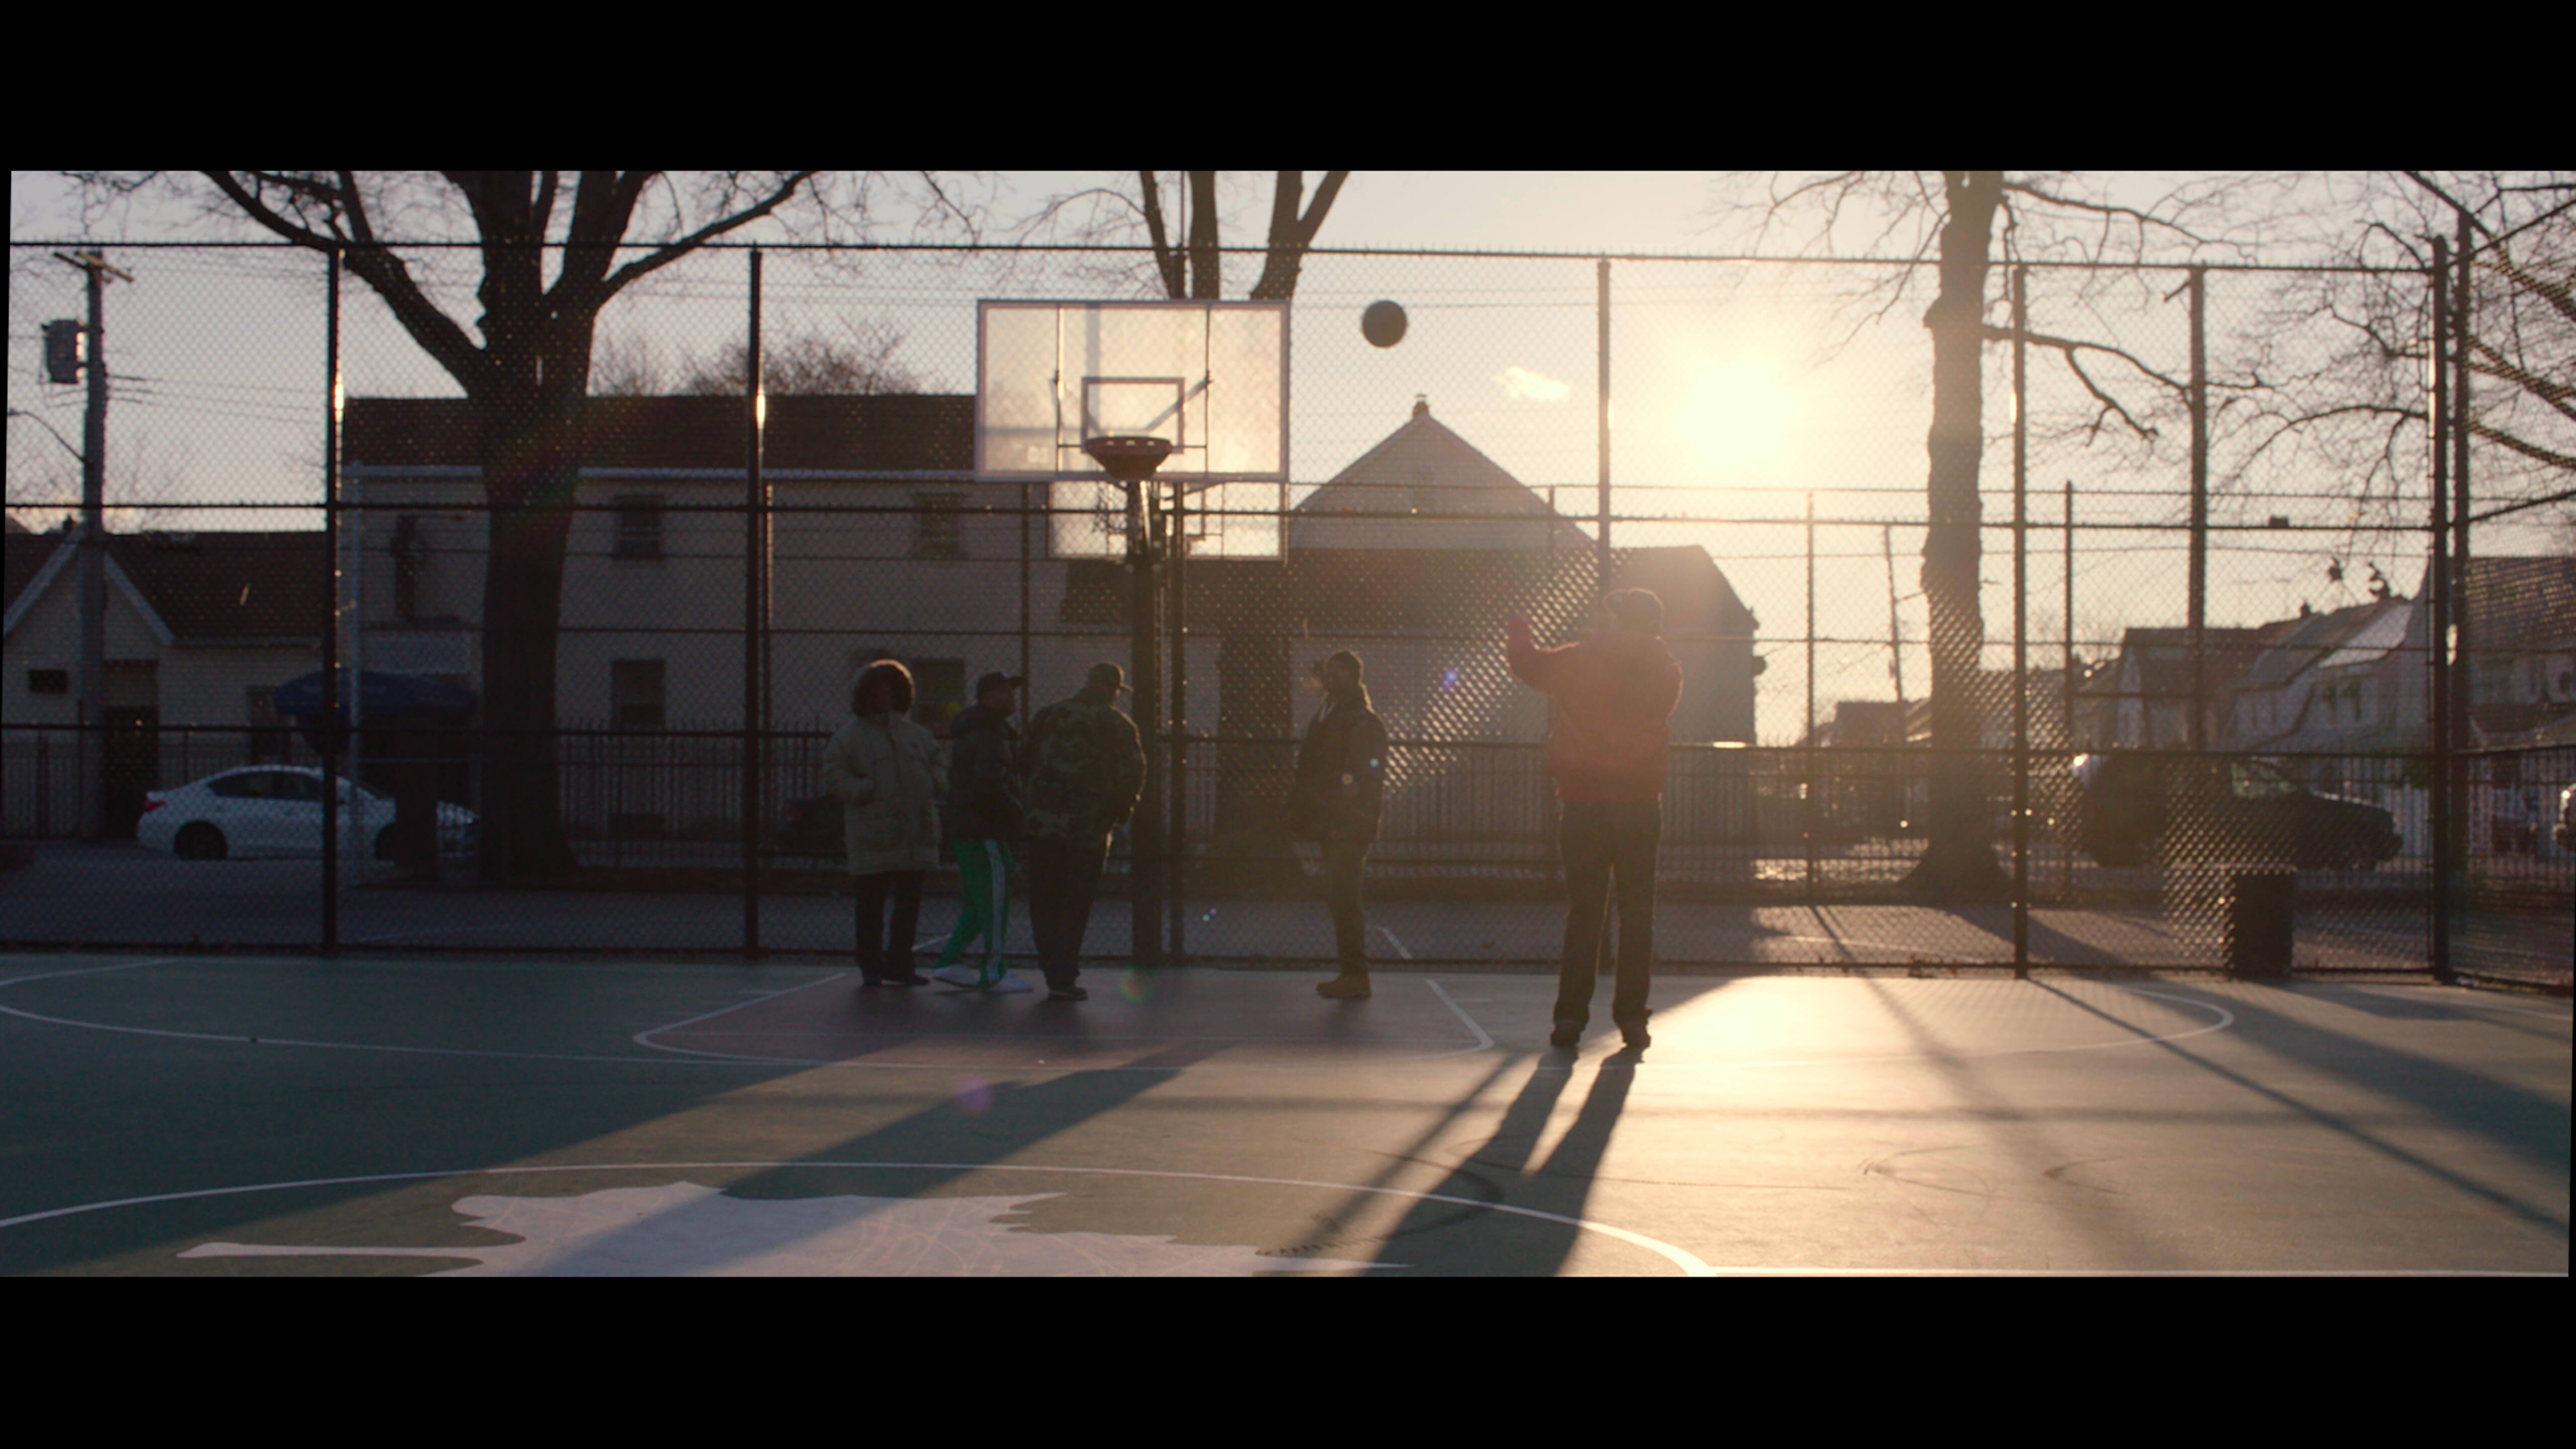 Young people playing on a basketball court.